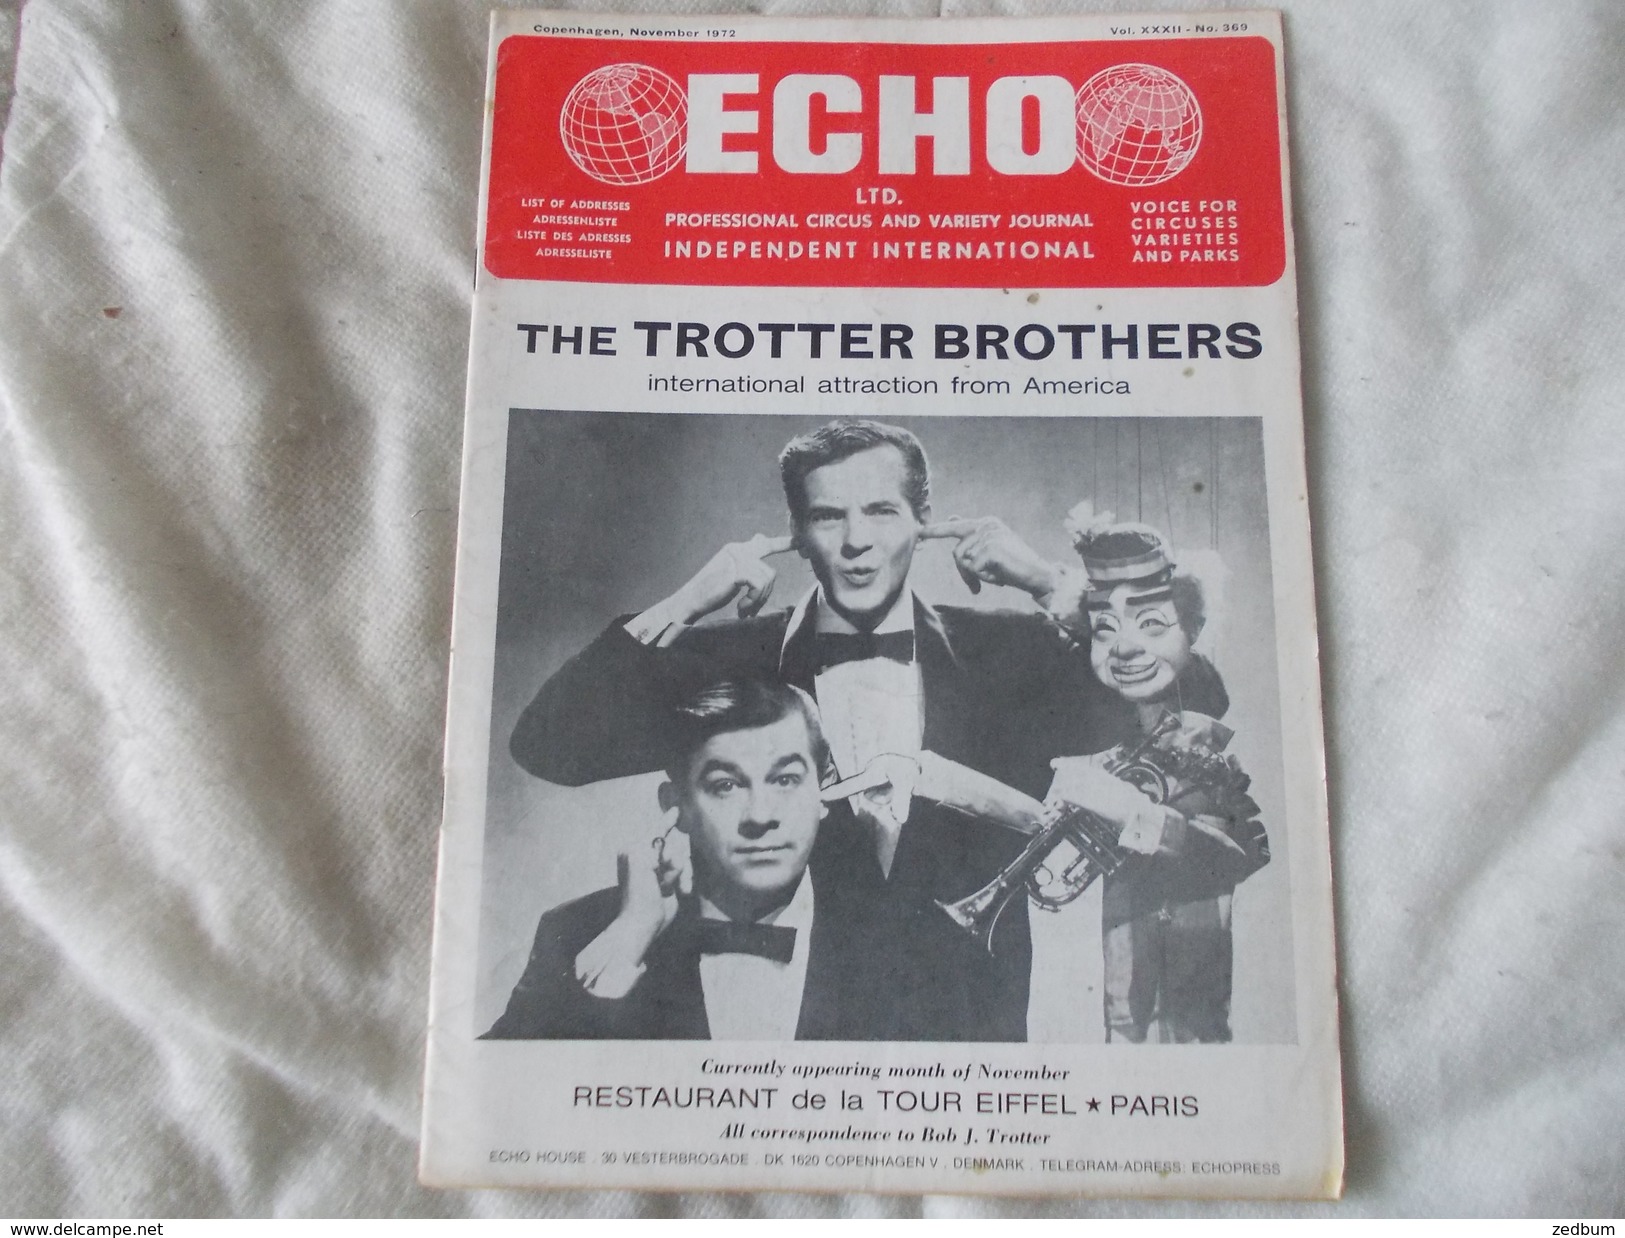 ECHO LTD Professional Circus And Variety Journal Independent International N° 369 November 1972 - Entretenimiento